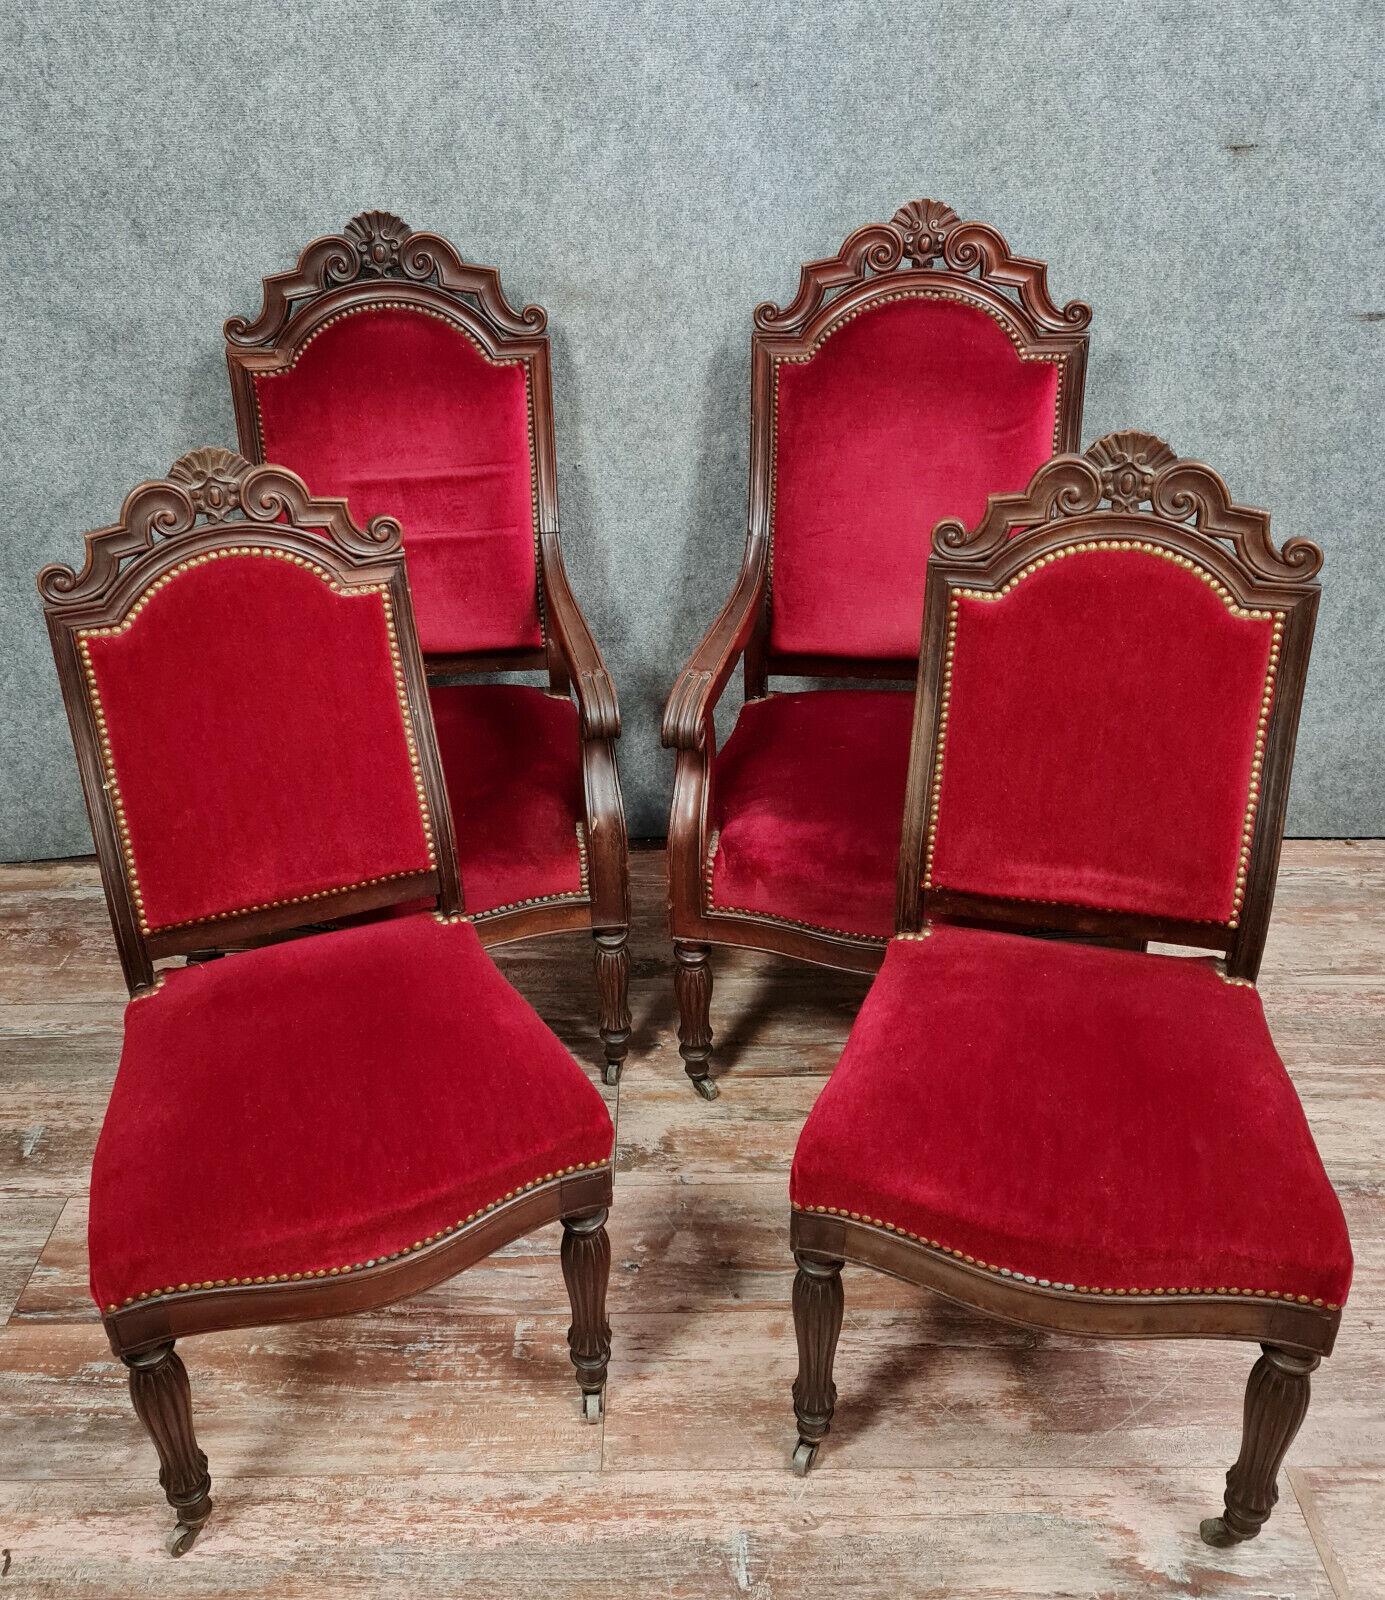 Transport yourself back to the elegance of the Restauration period with this Exquisite Set of 4 Restauration Period Mahogany Chairs, crafted circa 1820. This magnificent ensemble, comprising two armchairs and two side chairs, embodies the refined